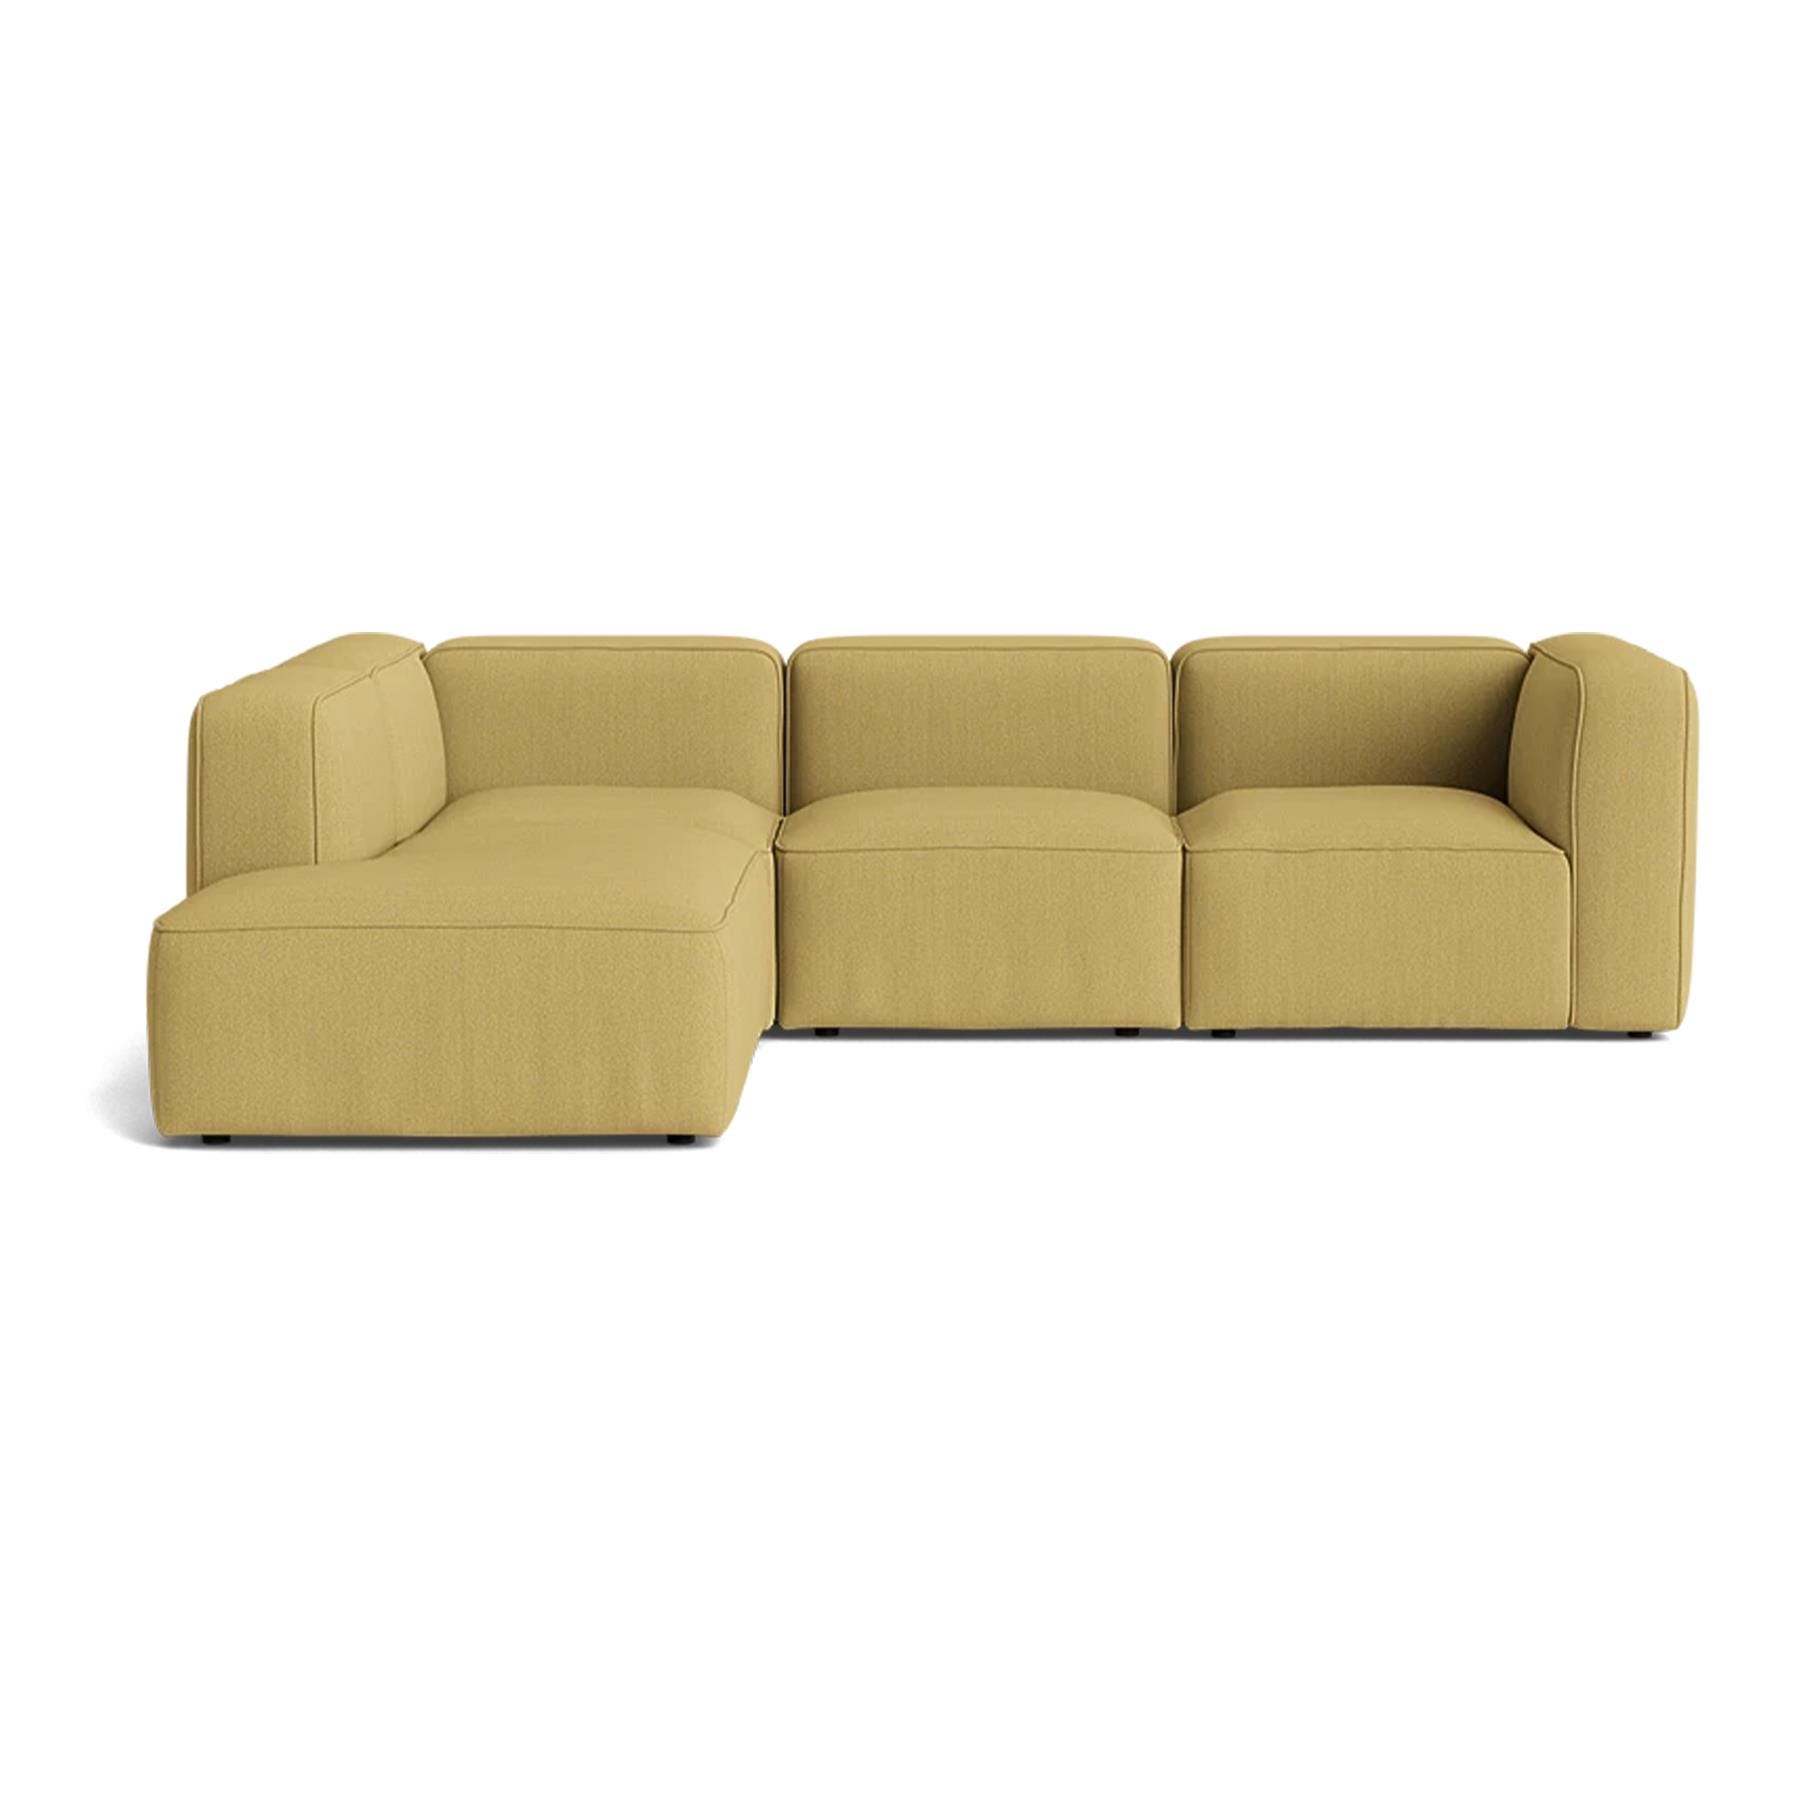 Make Nordic Basecamp Small Family Sofa Hallingdal 407 Left Yellow Designer Furniture From Holloways Of Ludlow